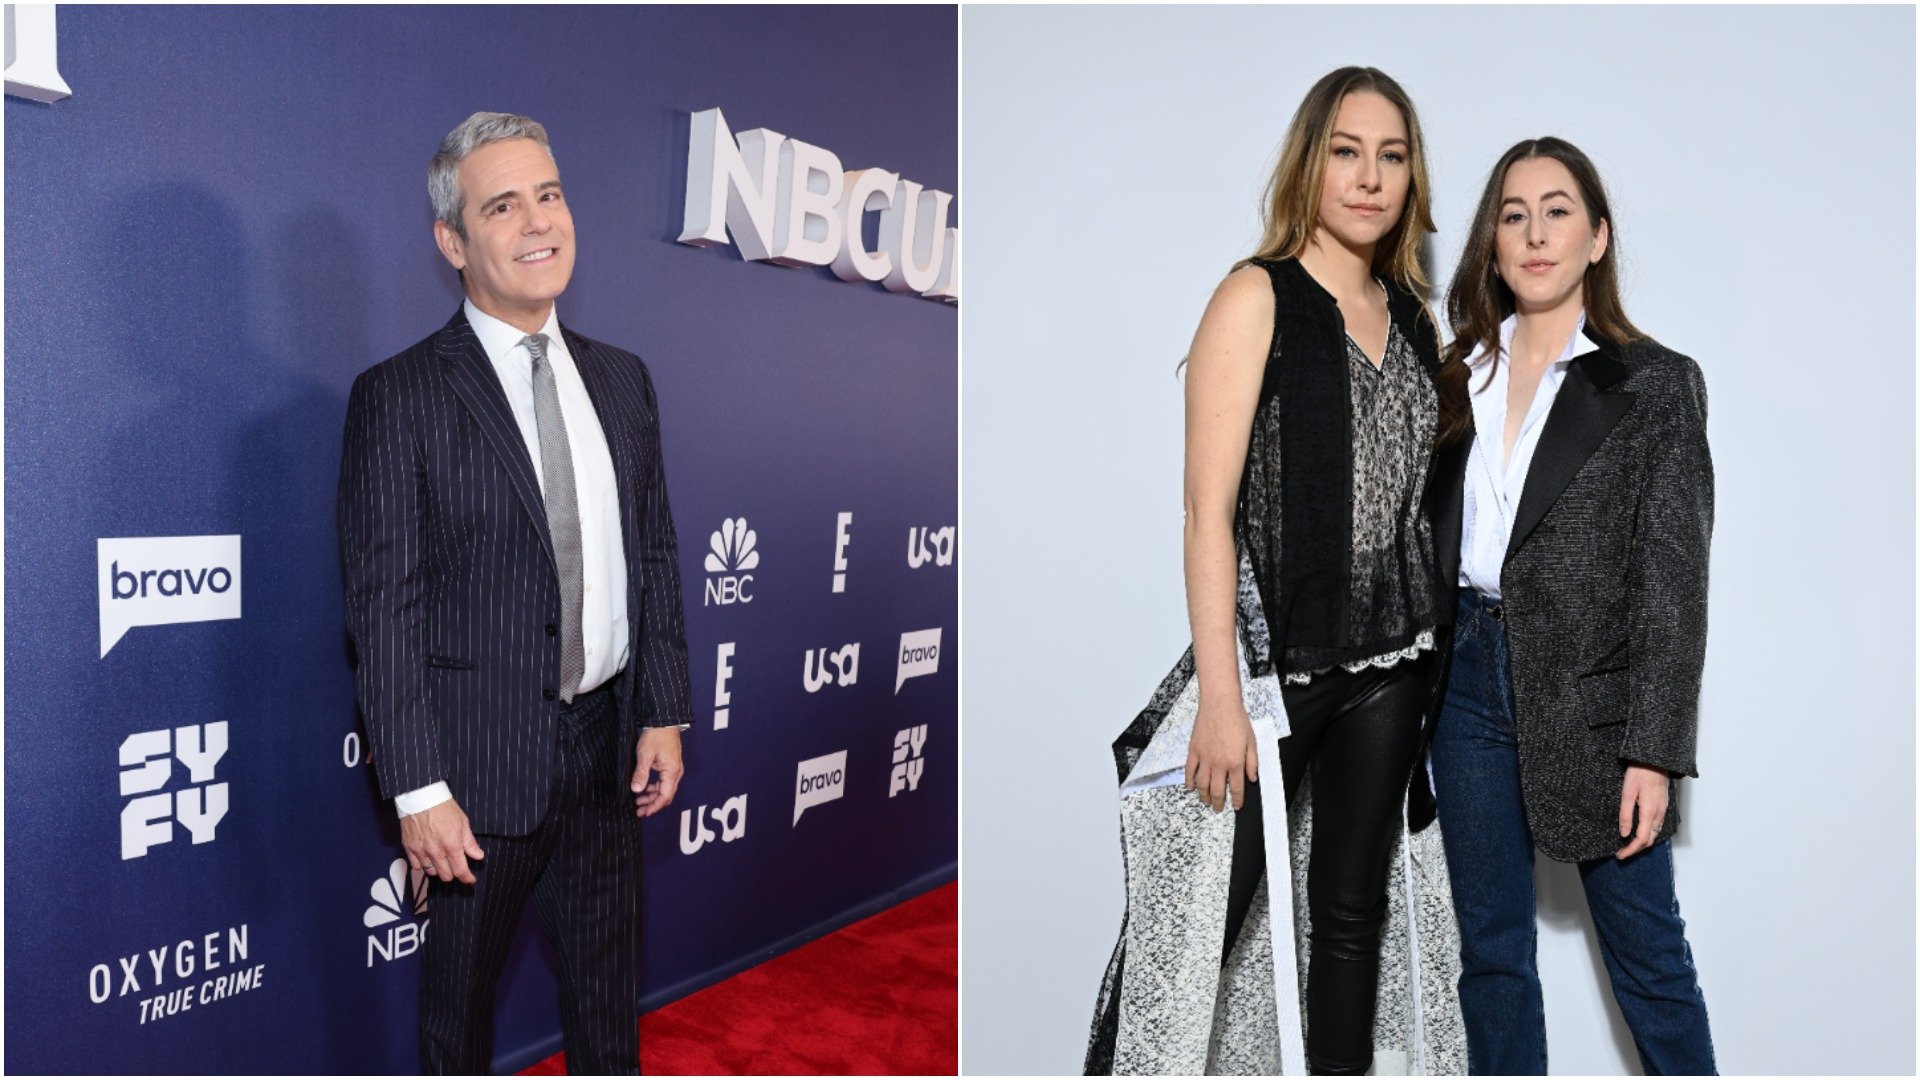 Andy Cohen smiles for cameras during the Bravo press junket. Este and Alana Haim pose on the red carpet during fashion week. 